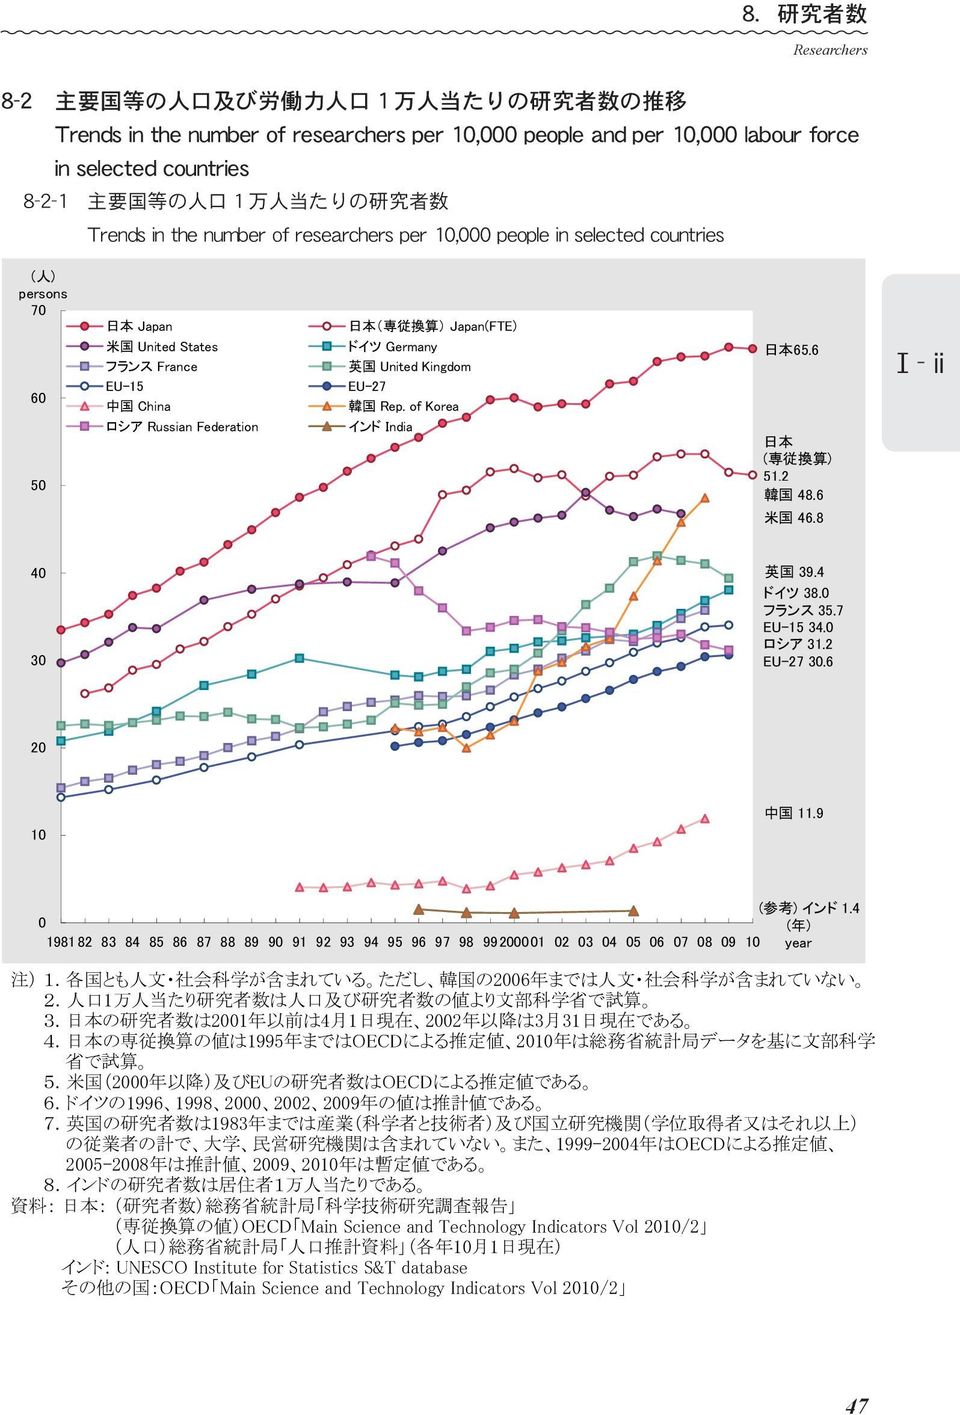 labour force in selected countries 8-2-1 主 要 国 等 の 人 口 1 万 人 当 たりの 研 究 者 数